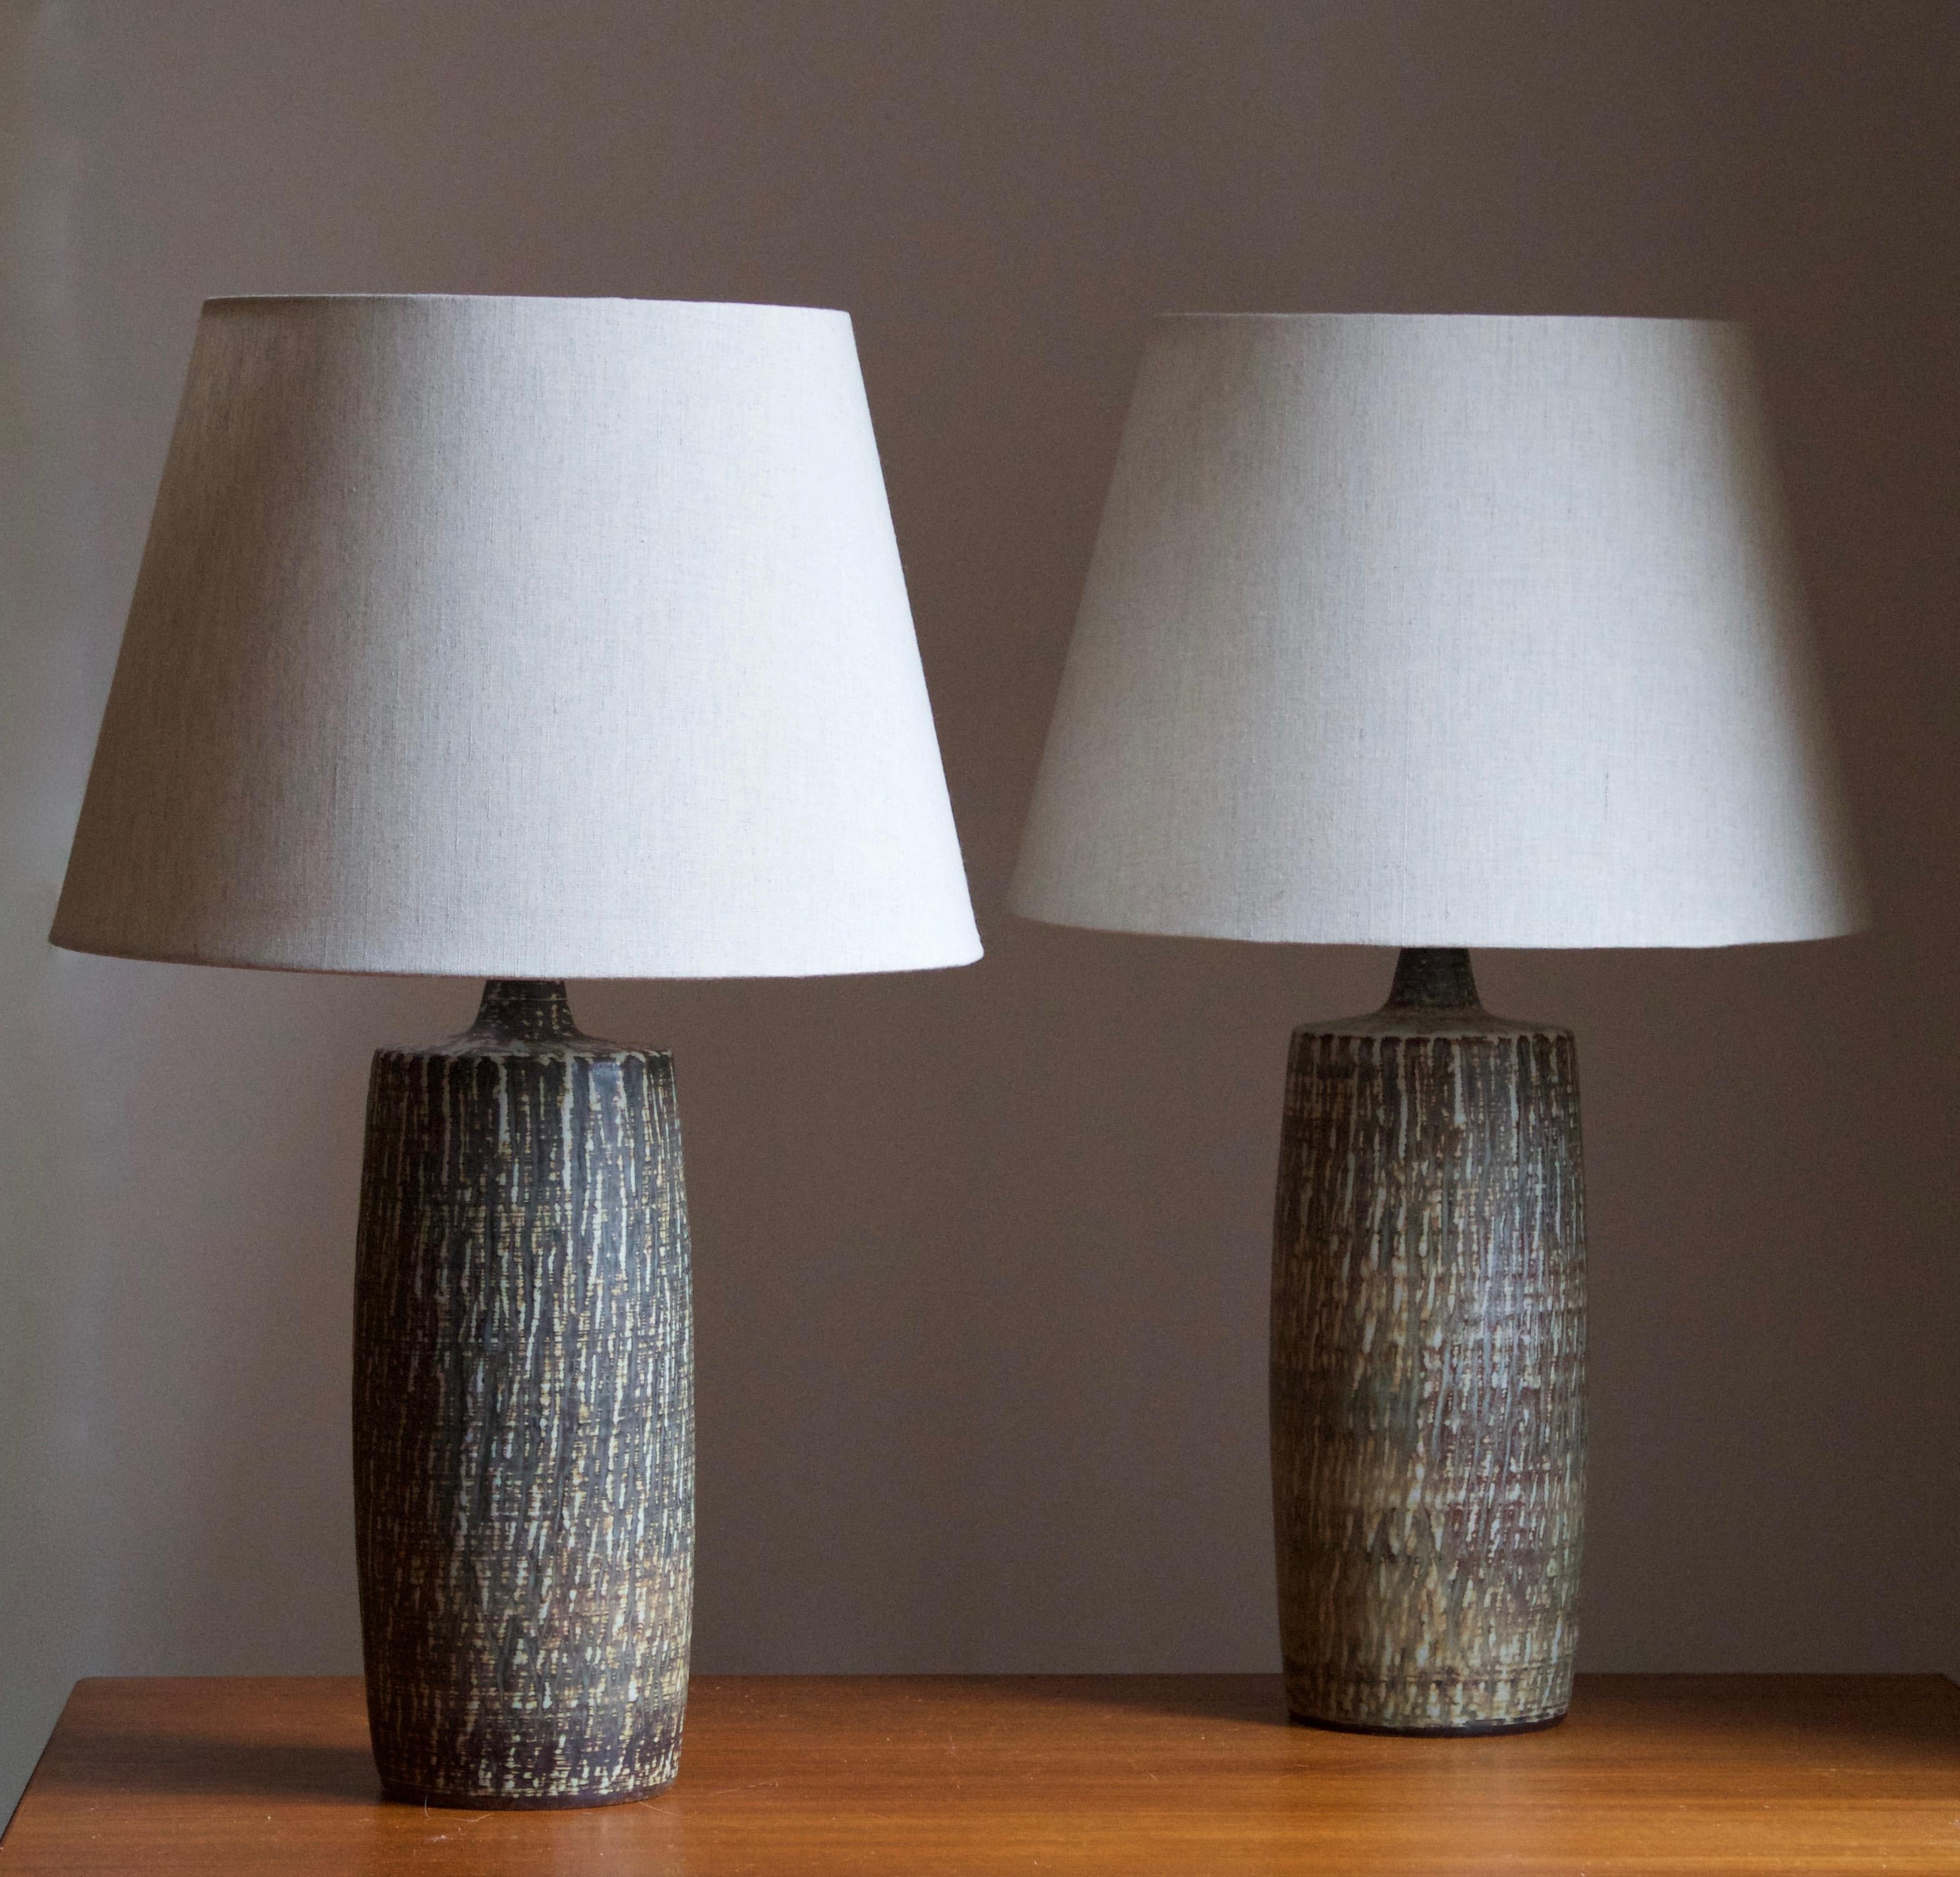 A pair of table lamps produced by Rörstrand, Sweden, 1950s. Designed by Gunnar Nylund, (Swedish, 1914-1997). Signed. 

Sold without lampshades. Stated dimensions exclude lampshade, height includes socket.

Nylund served as artistic director at